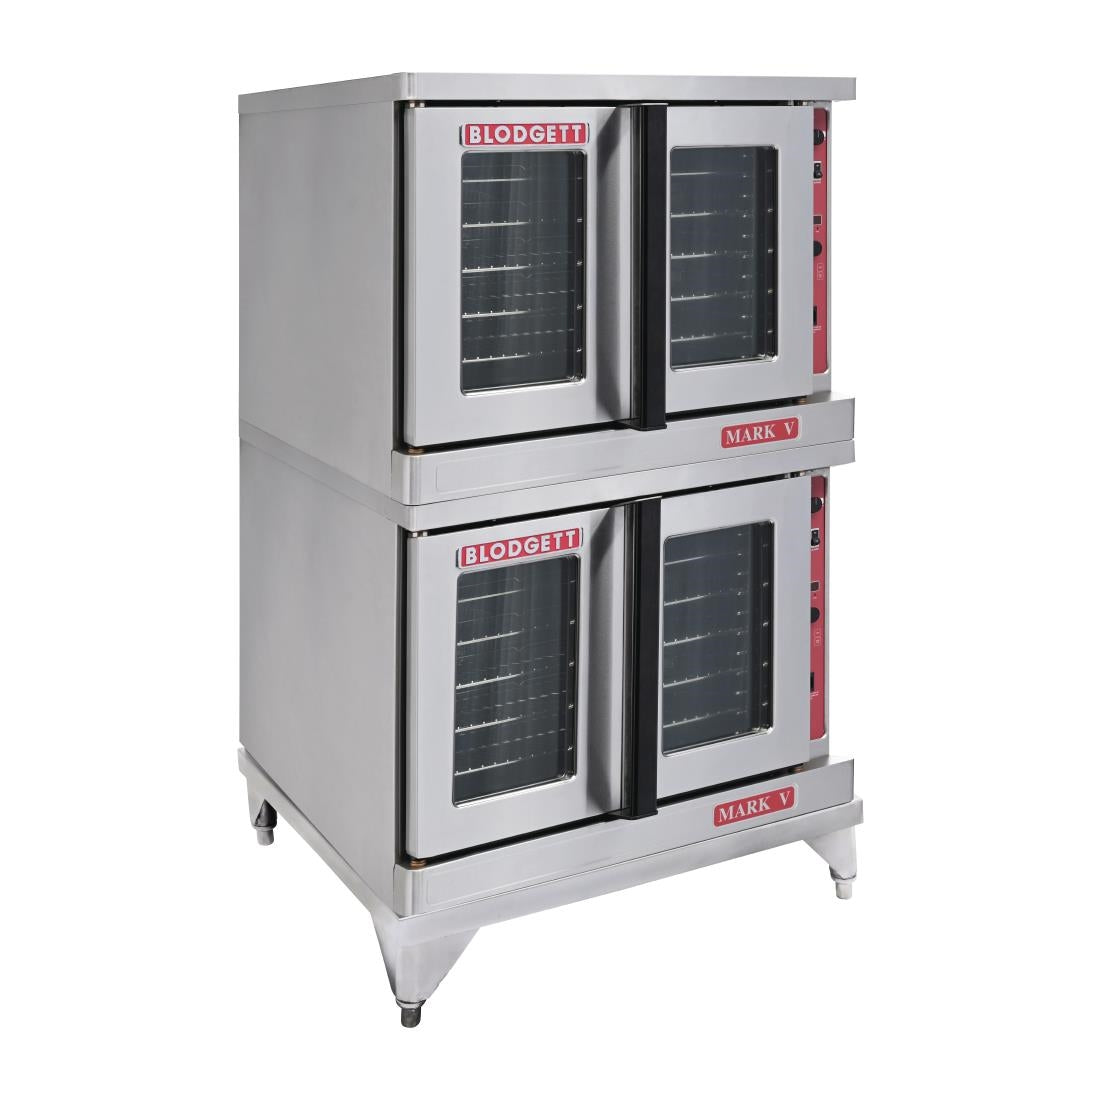 FP873 Blodgett Double Door Stacked Convection Oven Mark V-2 JD Catering Equipment Solutions Ltd